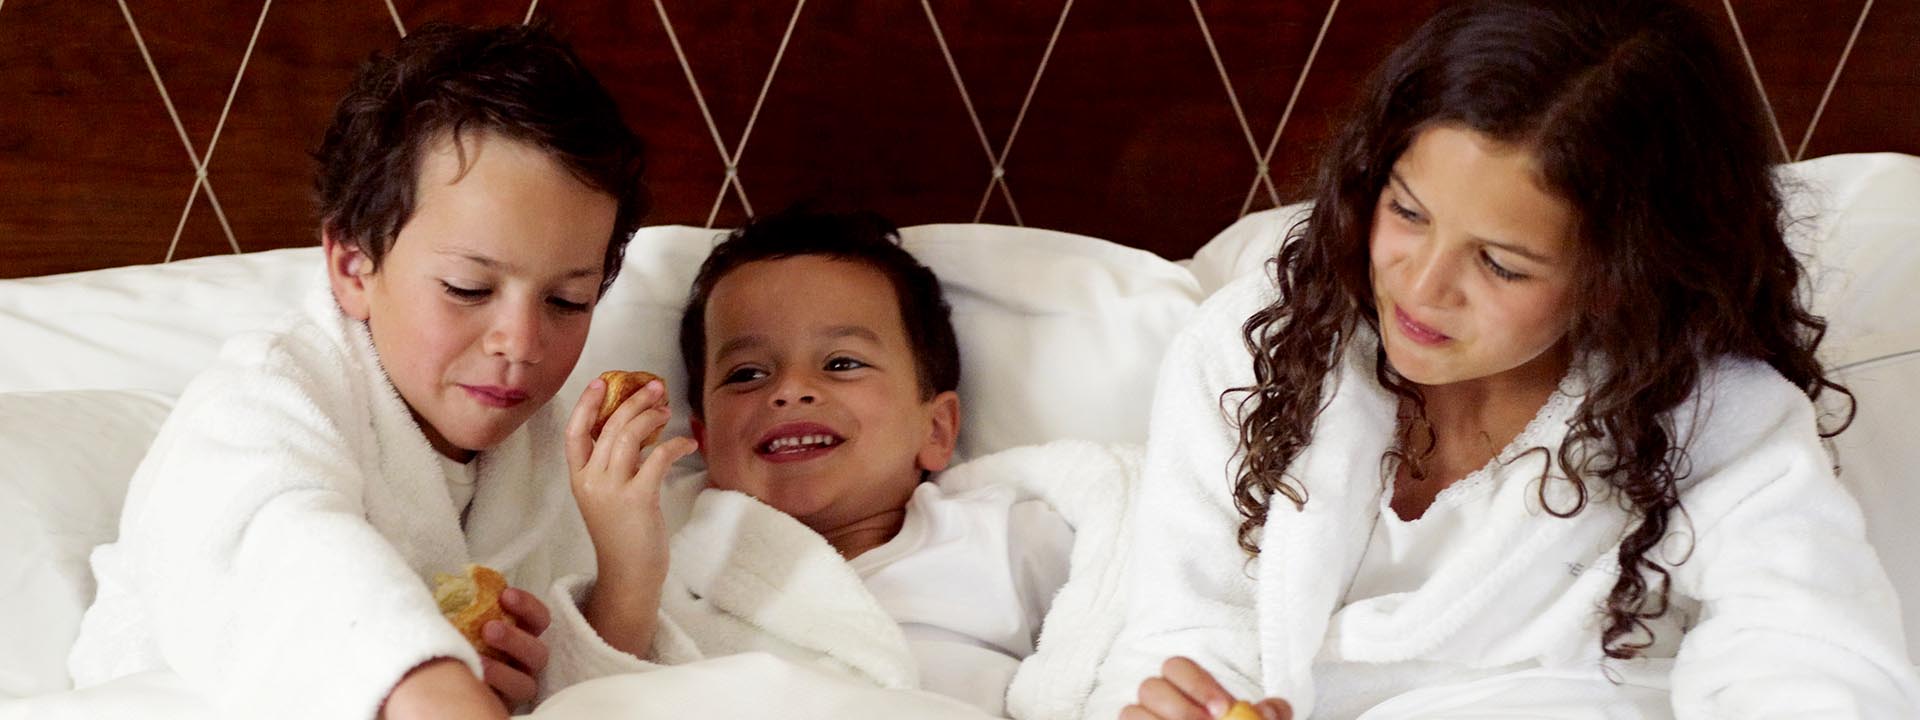 Three happy children smiling and eating at the hotel, in white bathrobes at The Berkeley.